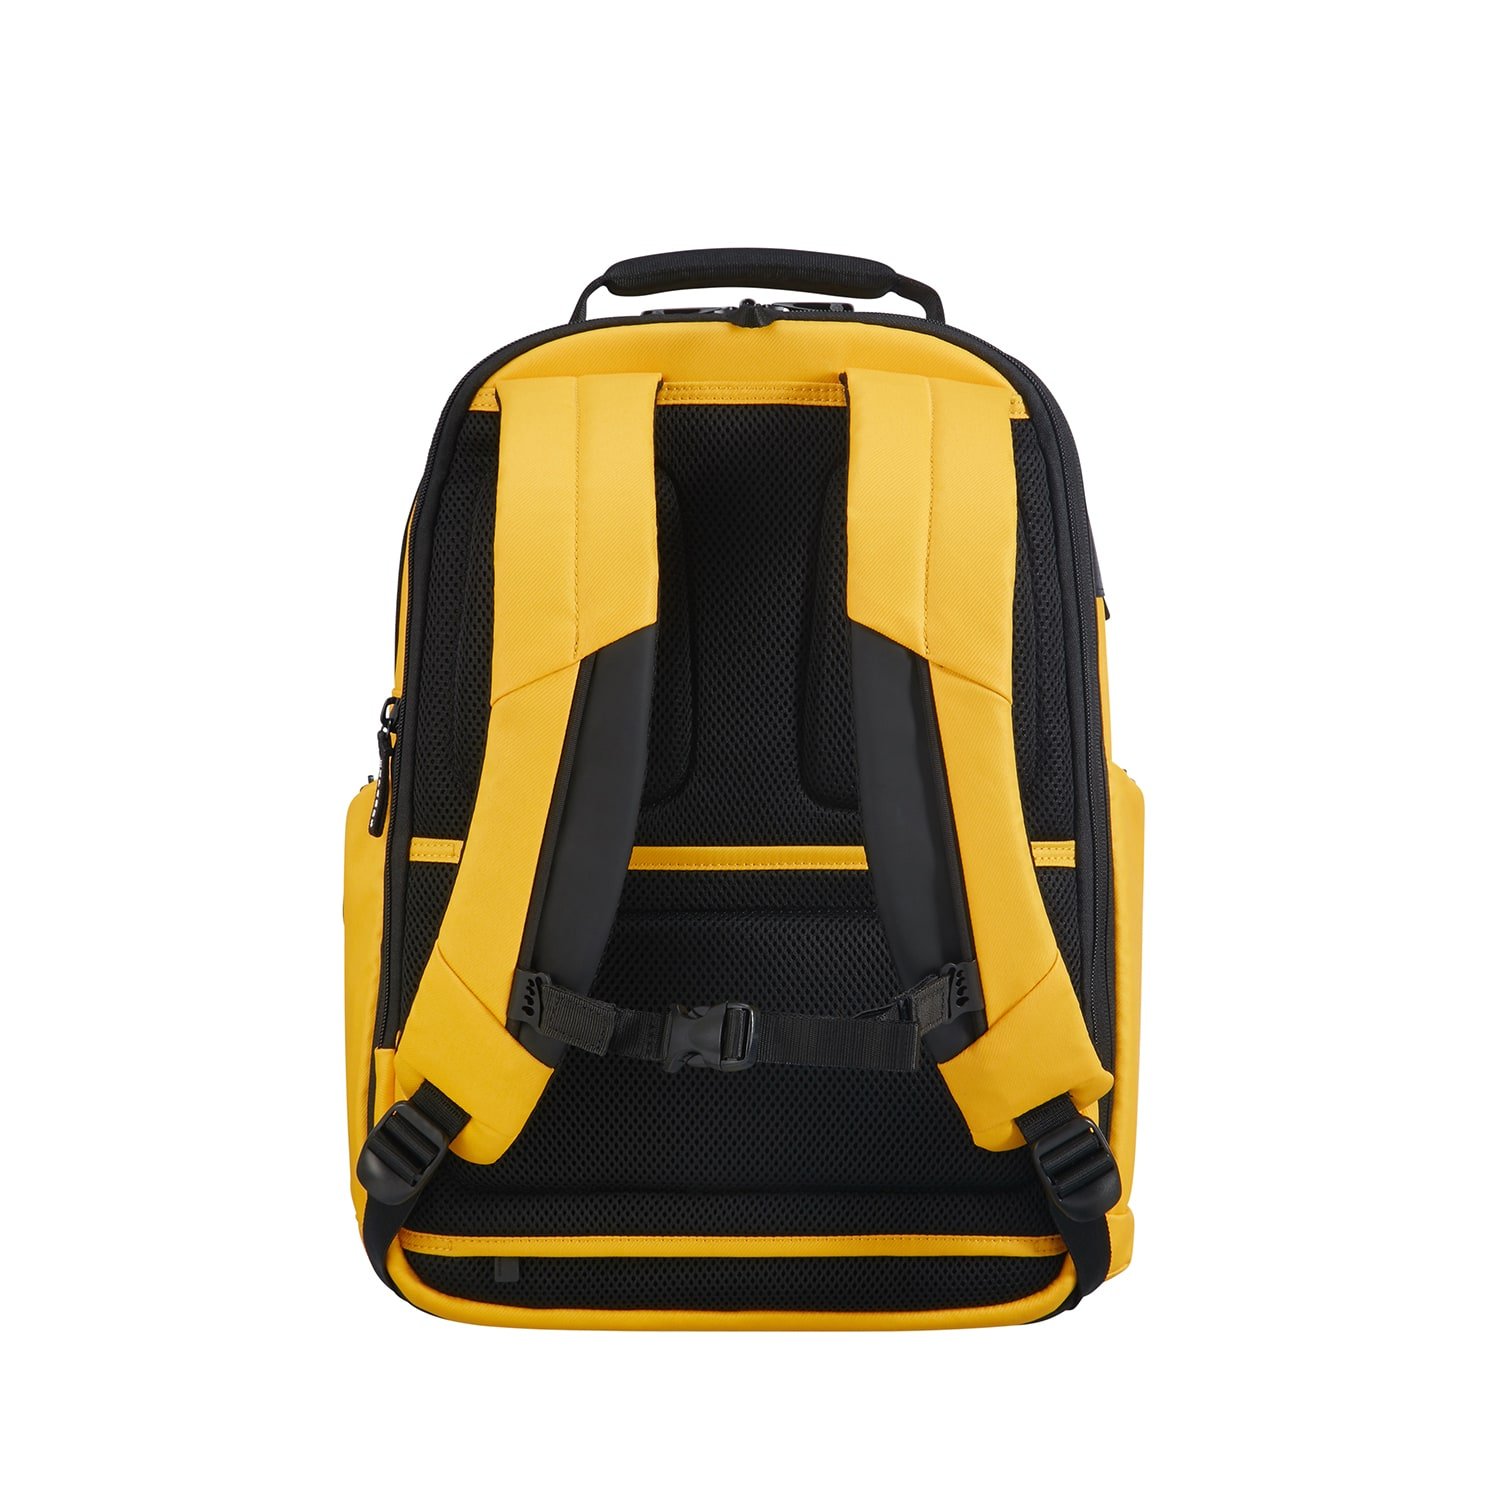 CITYVIBE 2.0-LAPT BACKPACK 15.6" EXP SCM7-006-SF000*06